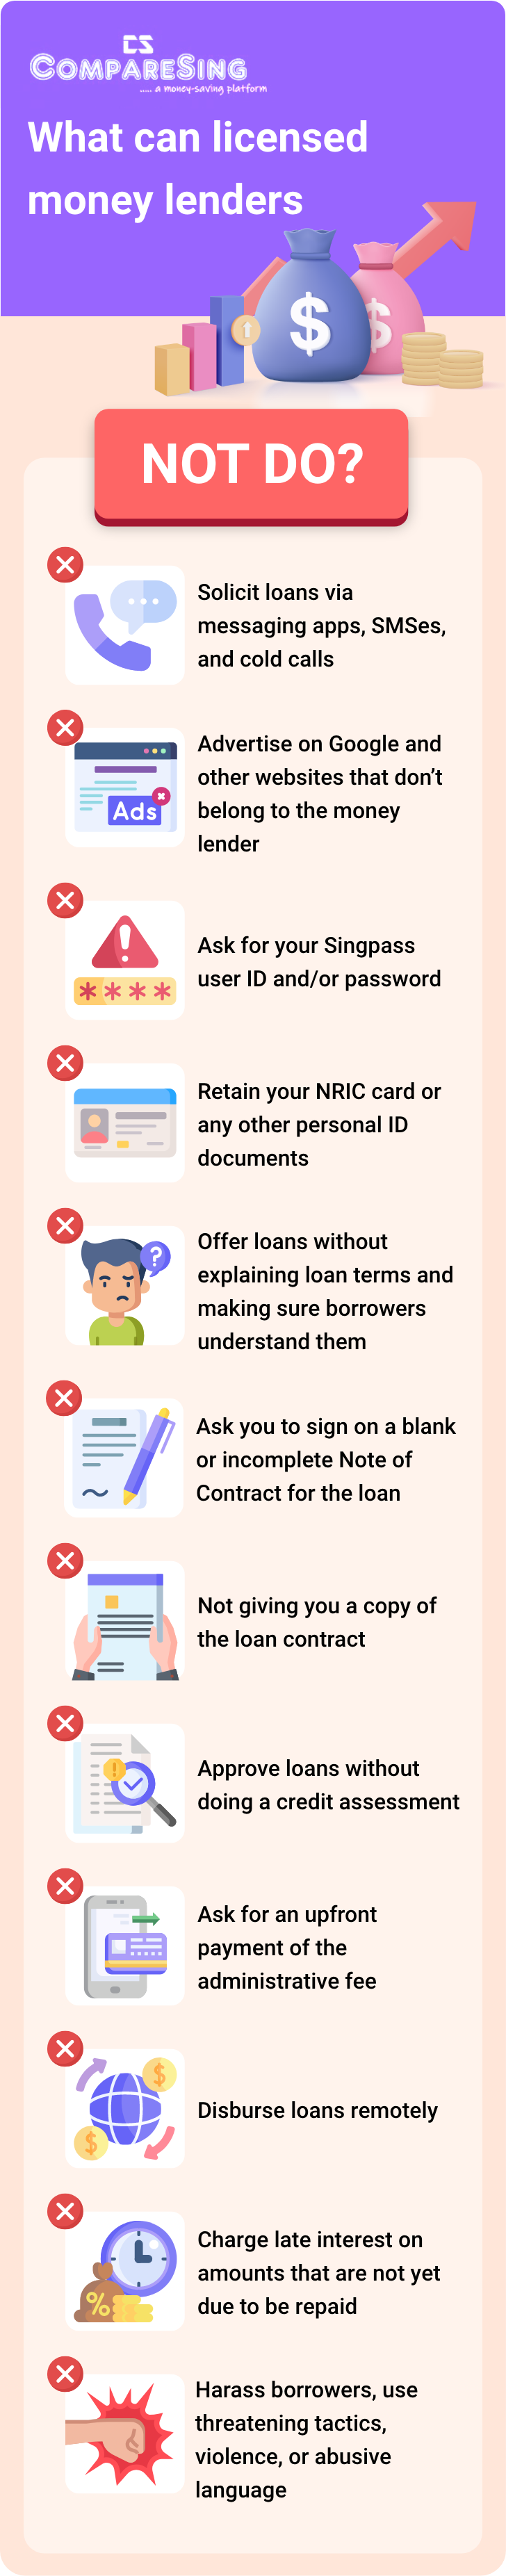 Infographic detailing things that licensed money lenders in Singapore cannot do